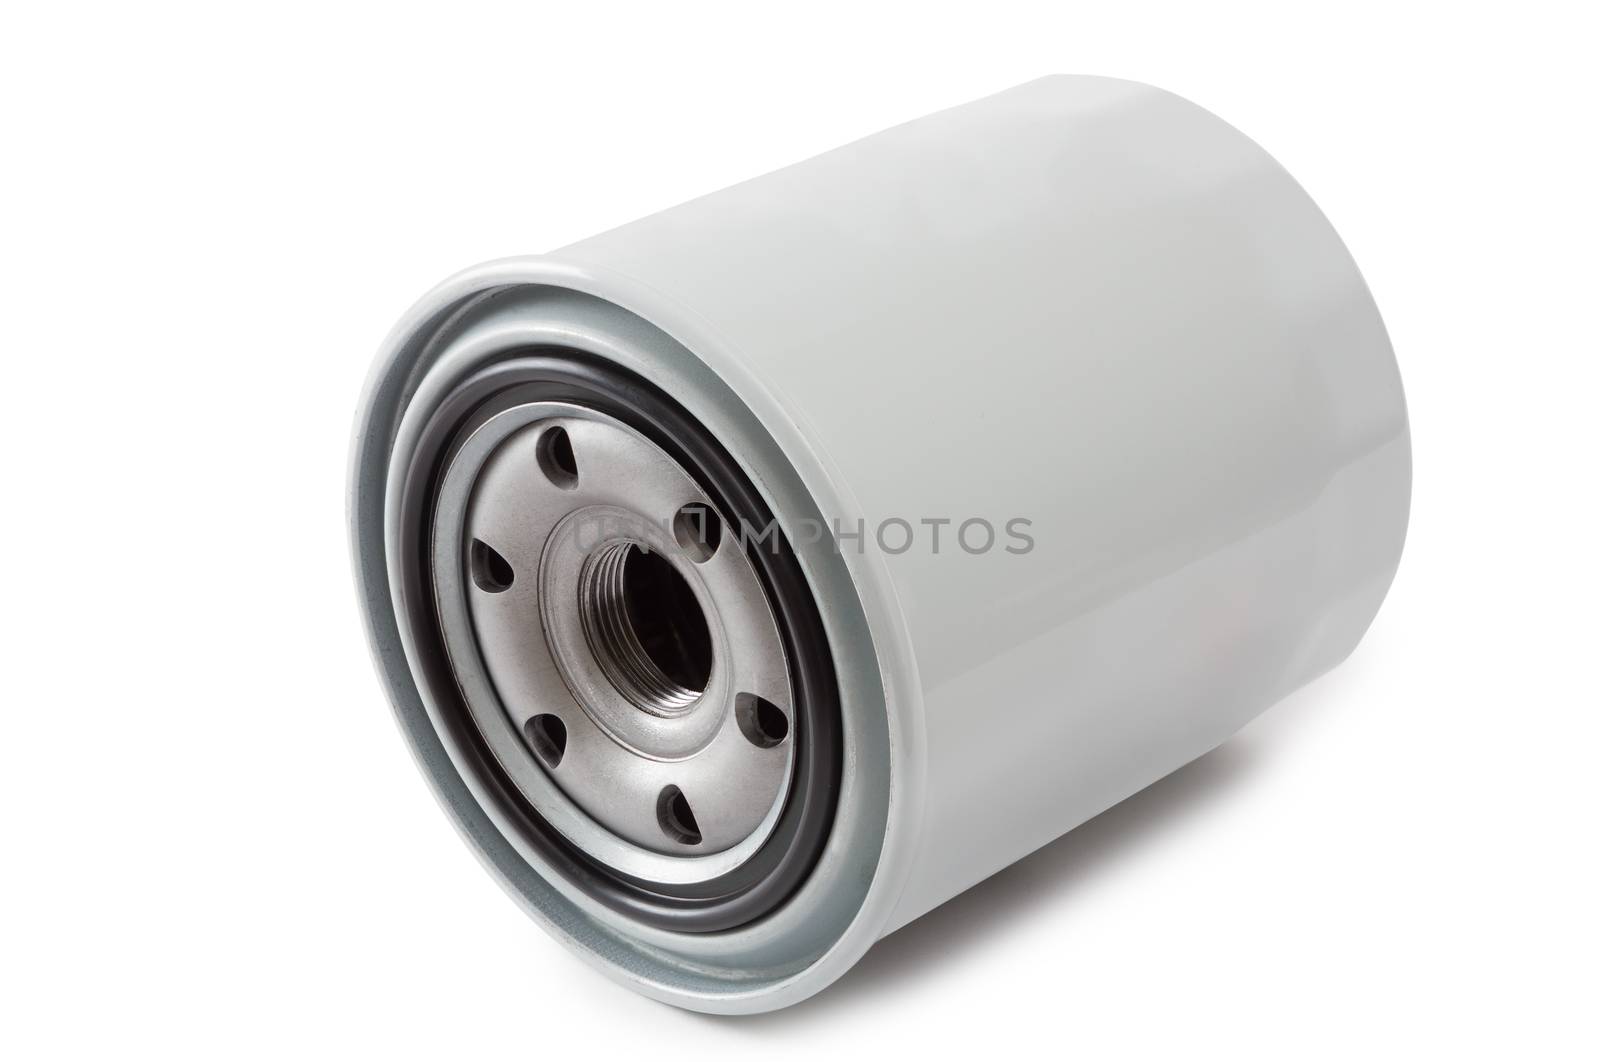 Automotive Oil Filter isolated on white background
